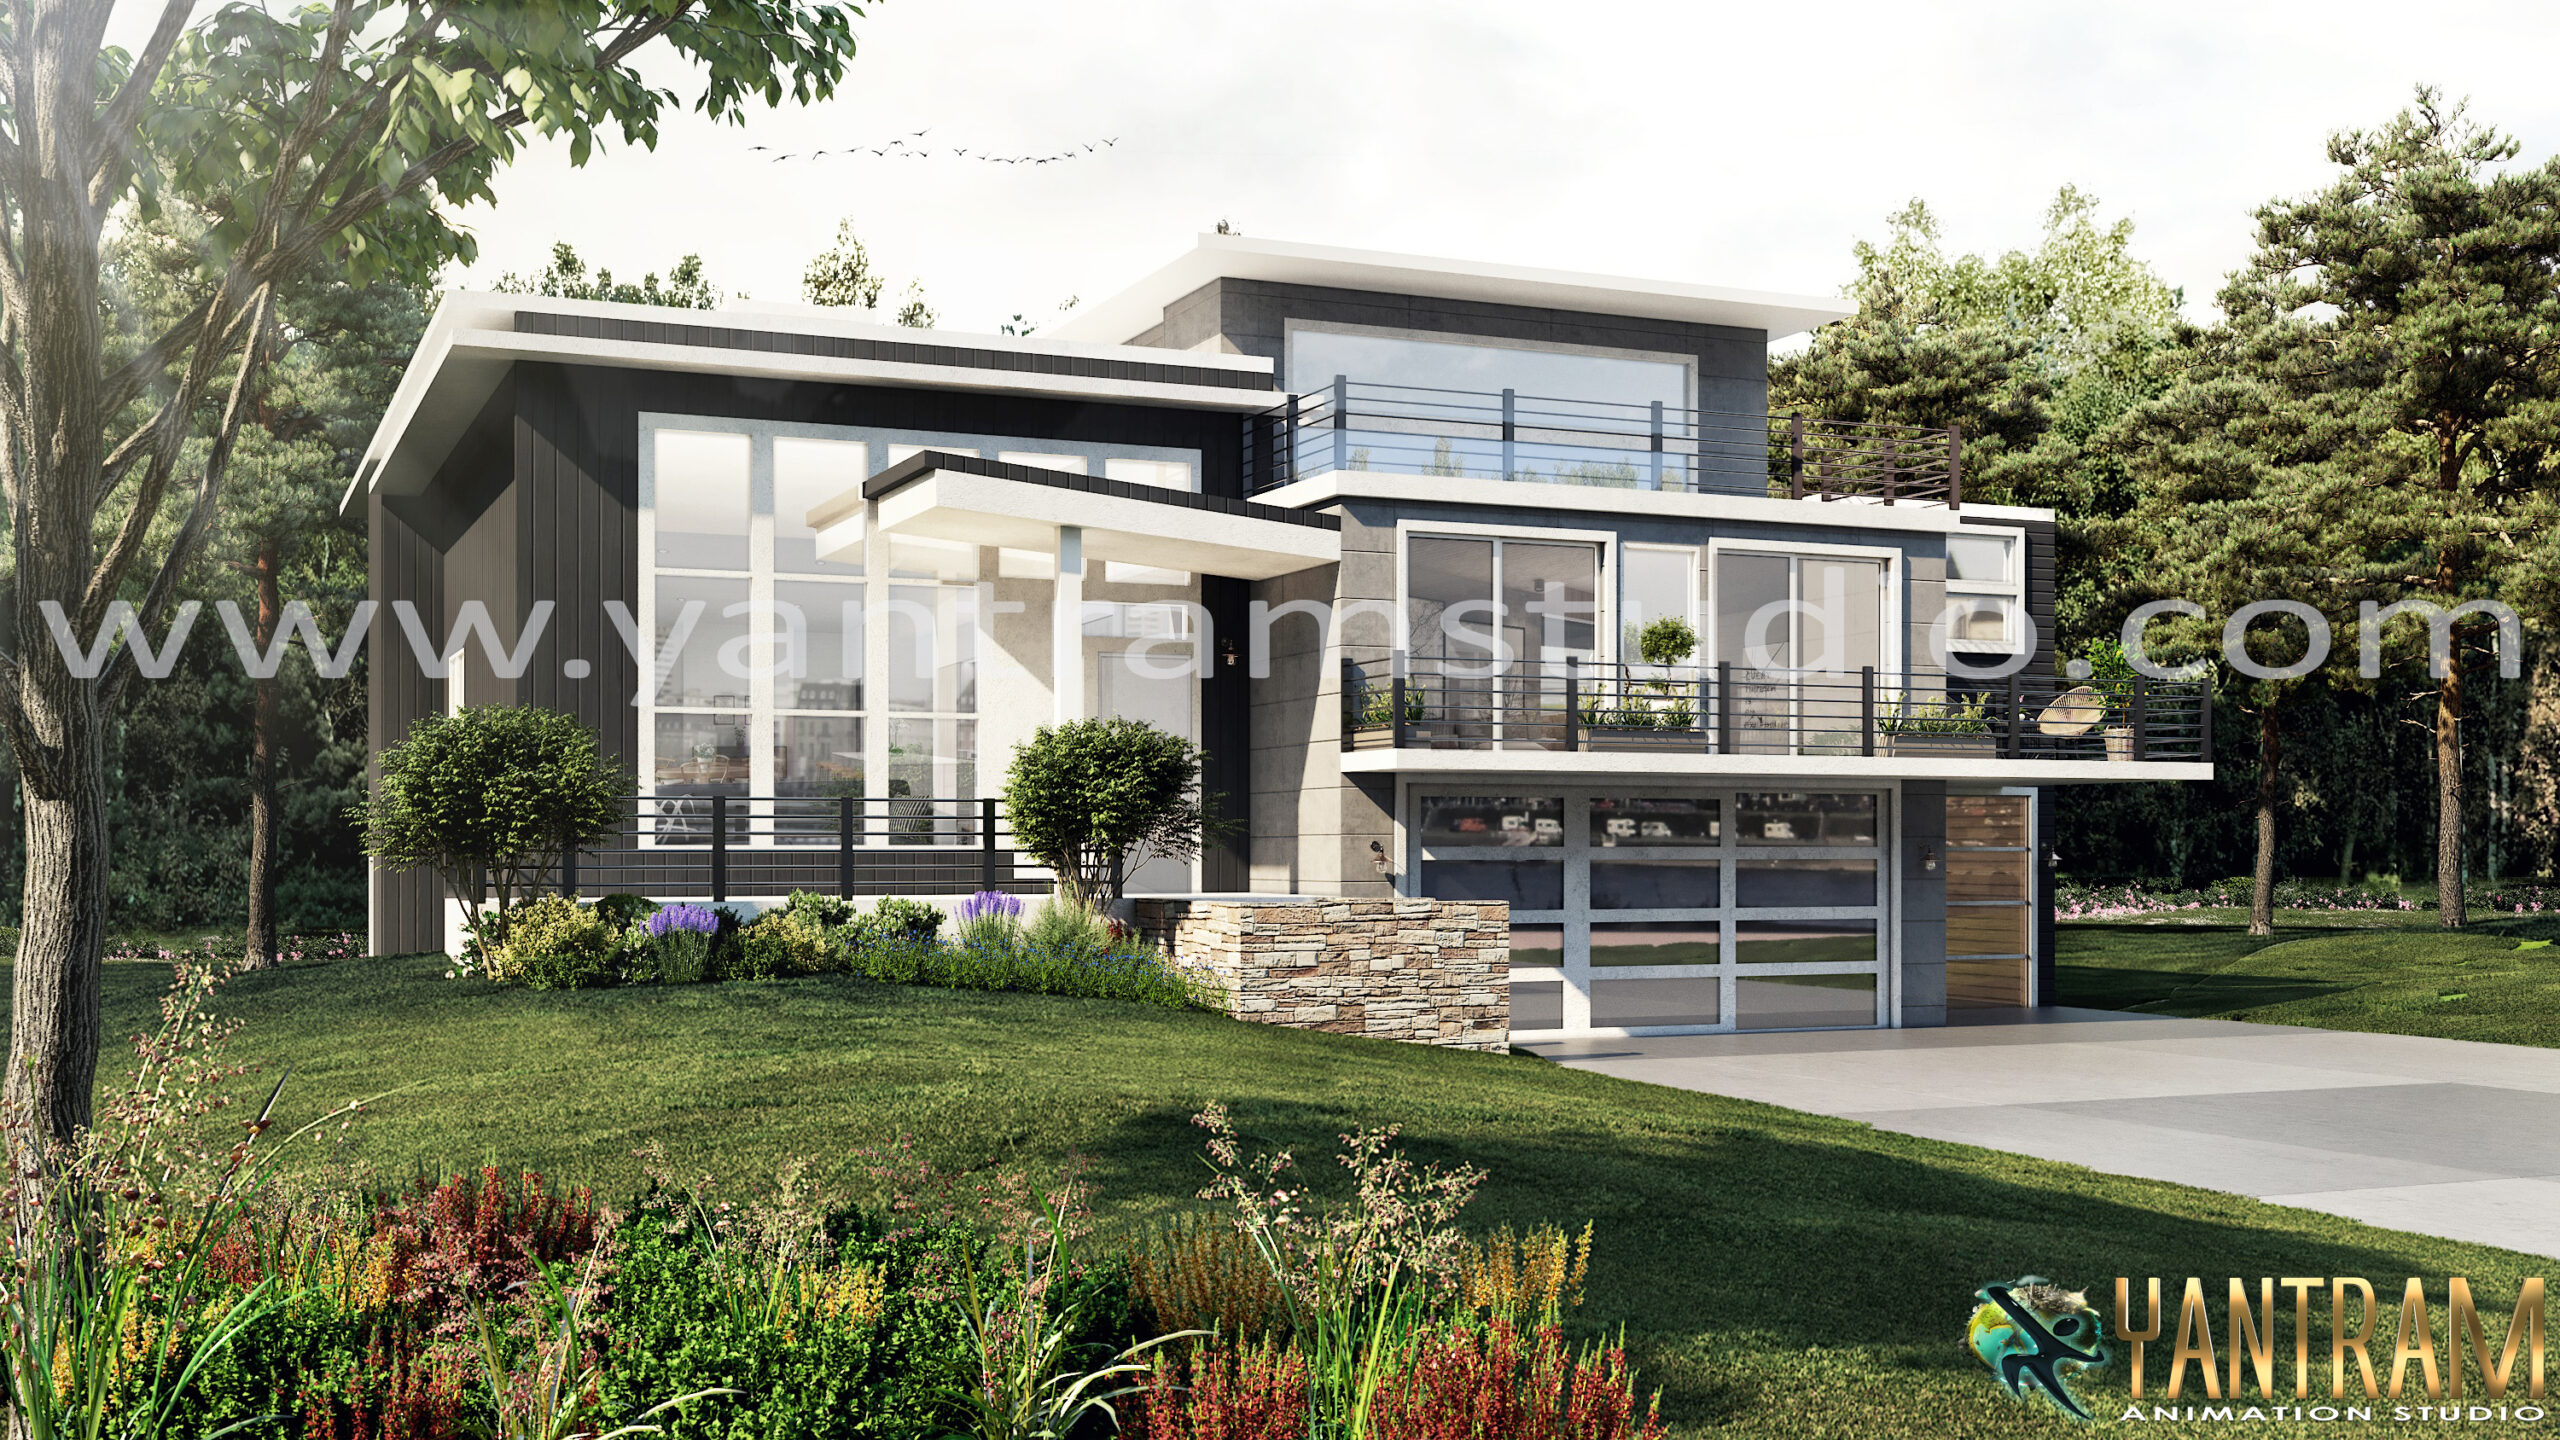 Morden Flat roof 3d exterior visualization house concept by Yantram architectural rendering company, Fort Worth, Texas